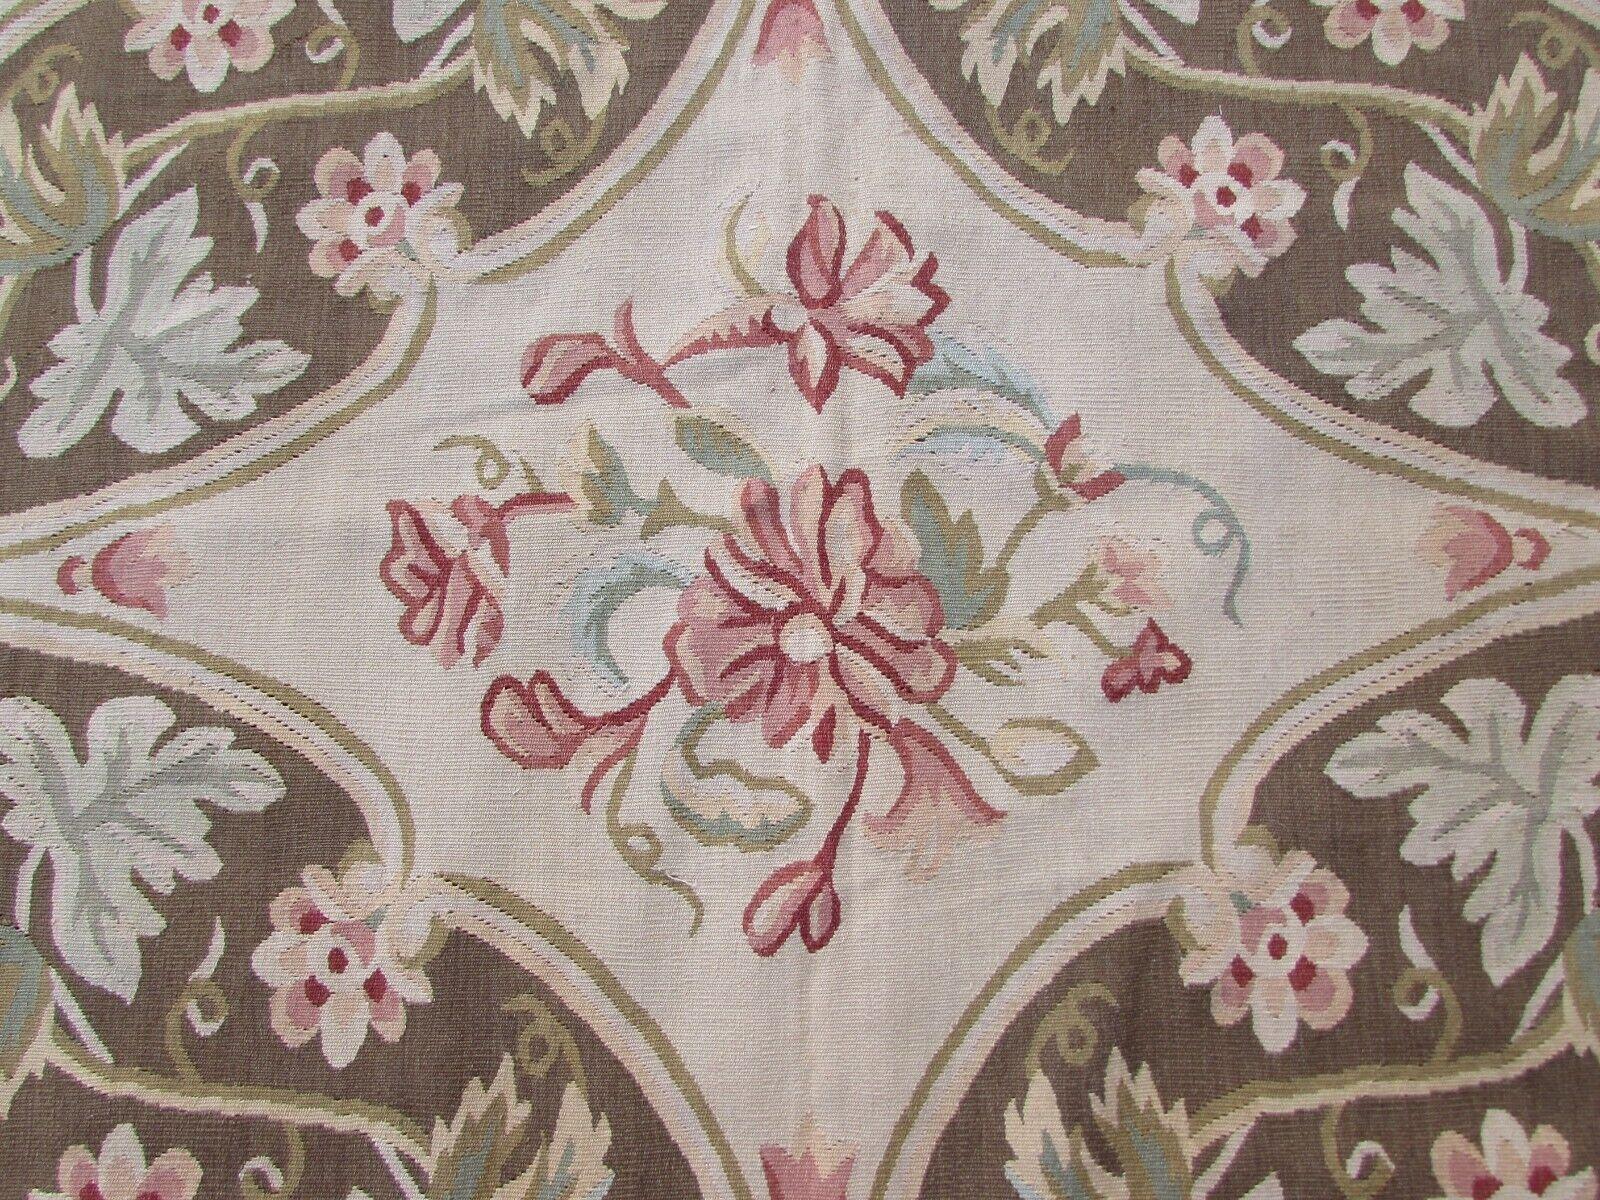 Handmade Vintage French Aubusson Flatweave Rug 9.9' x 14.2', 1970s, 1Q42 For Sale 1